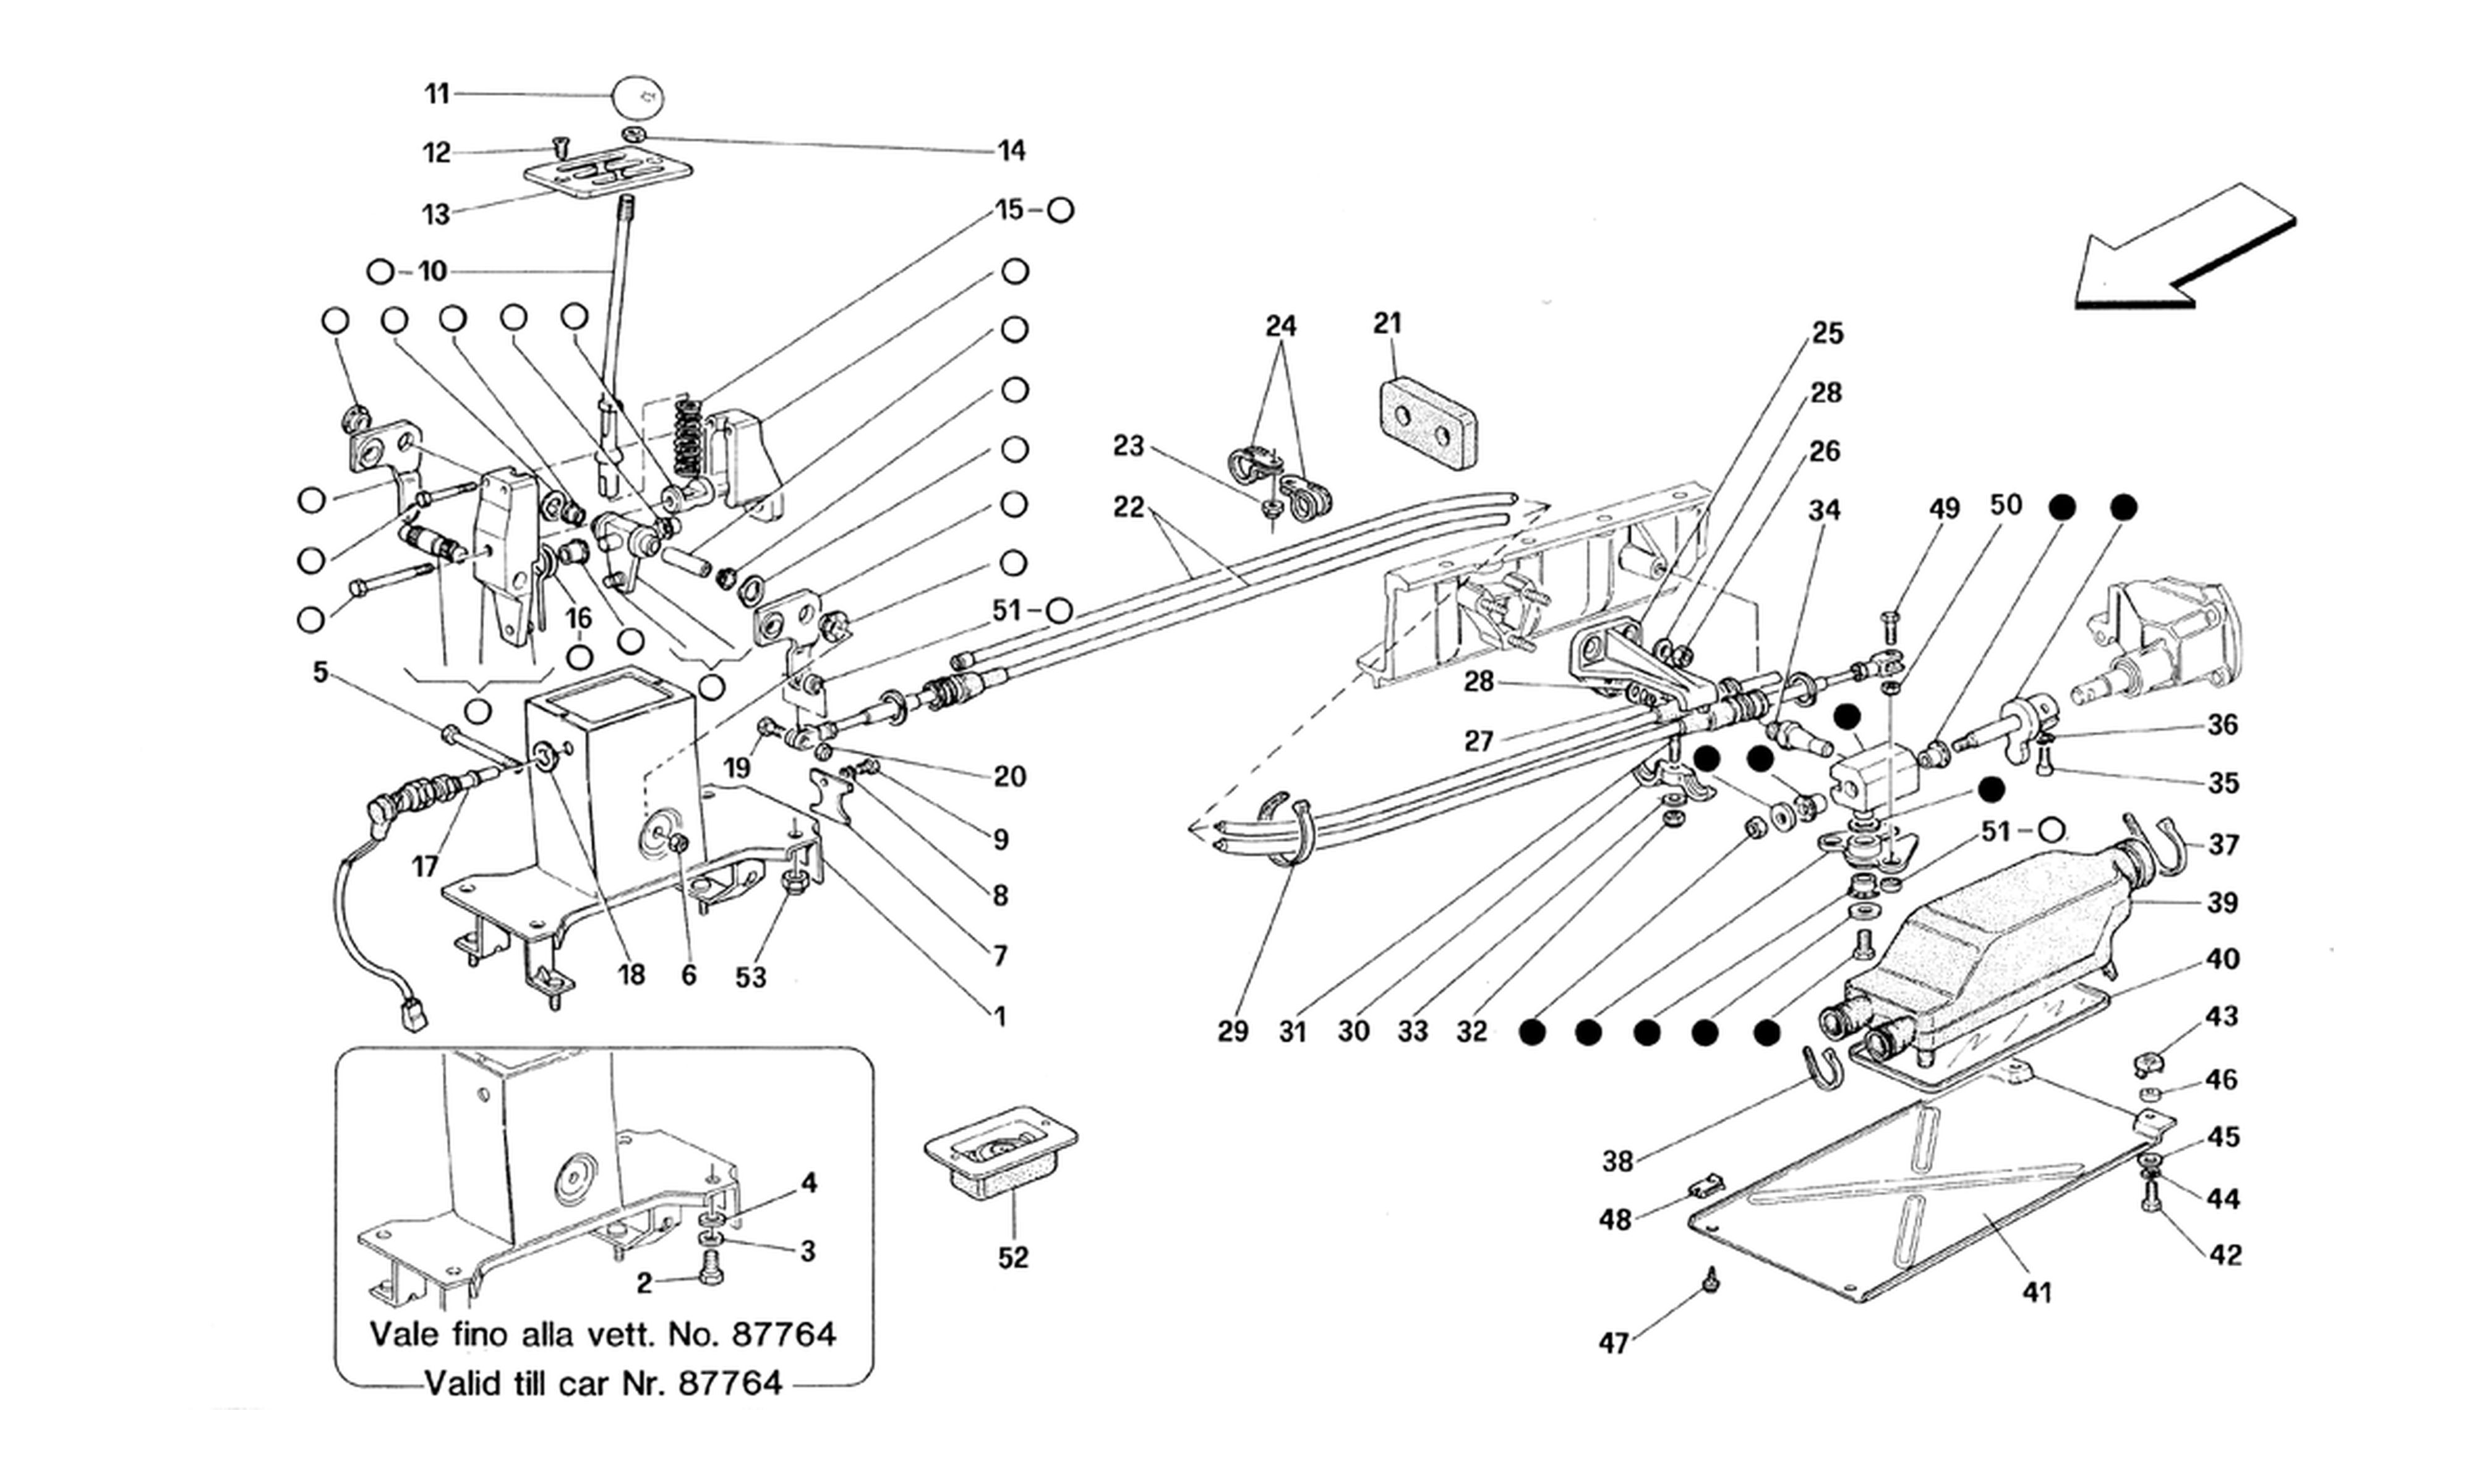 Schematic: Outside Gearbox Controls